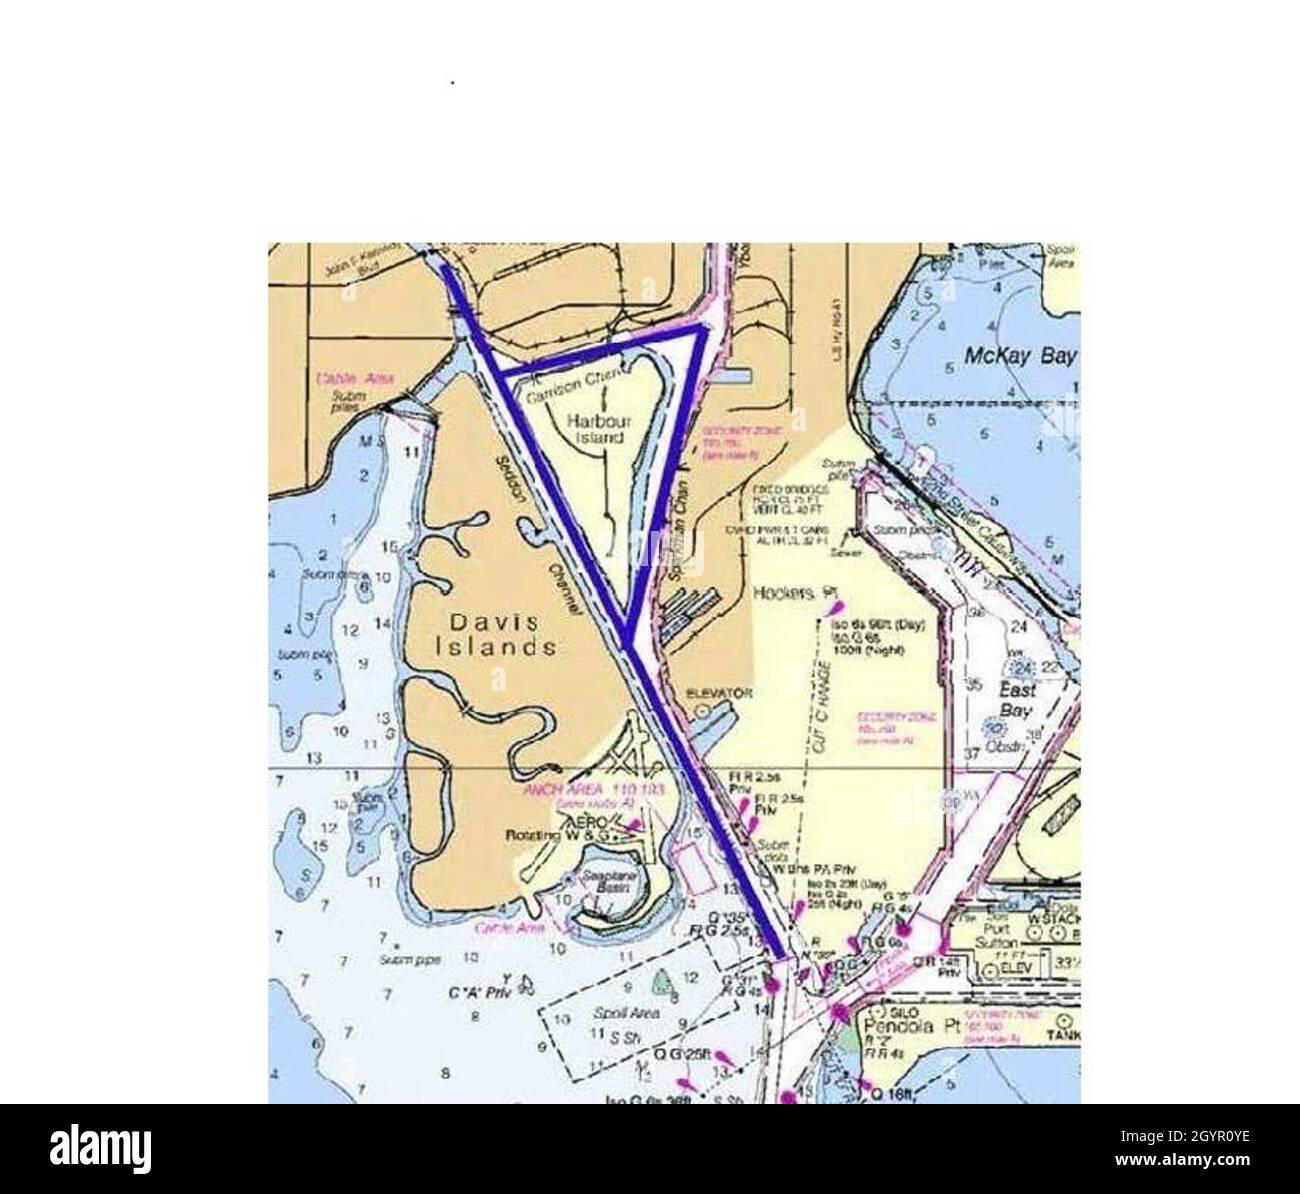 A graphic depicts the safety zone during the Jose Gasparilla Pirate Invasion in Tampa Bay, Florida, Thursday, Jan. 23, 2020. The Coast Guard is partnering with multiple local agencies to ensure the safety and security of boaters during the event. (U.S. Coast Guard graphic provided by Sector St. Petersburg) Stock Photo